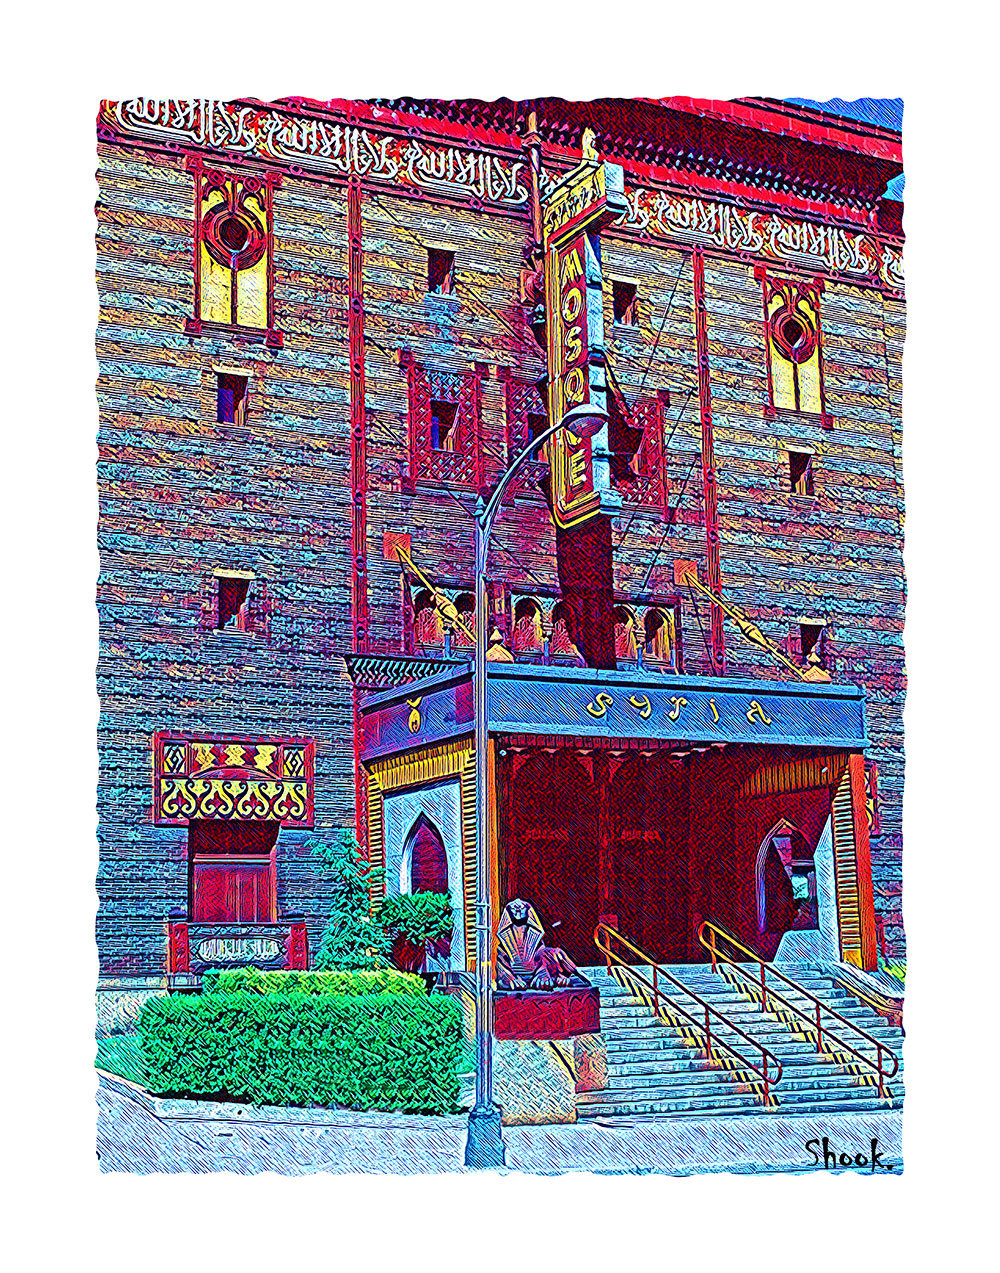 The Mosque Pittsburgh Giclée Art Print  (Multi-size options)